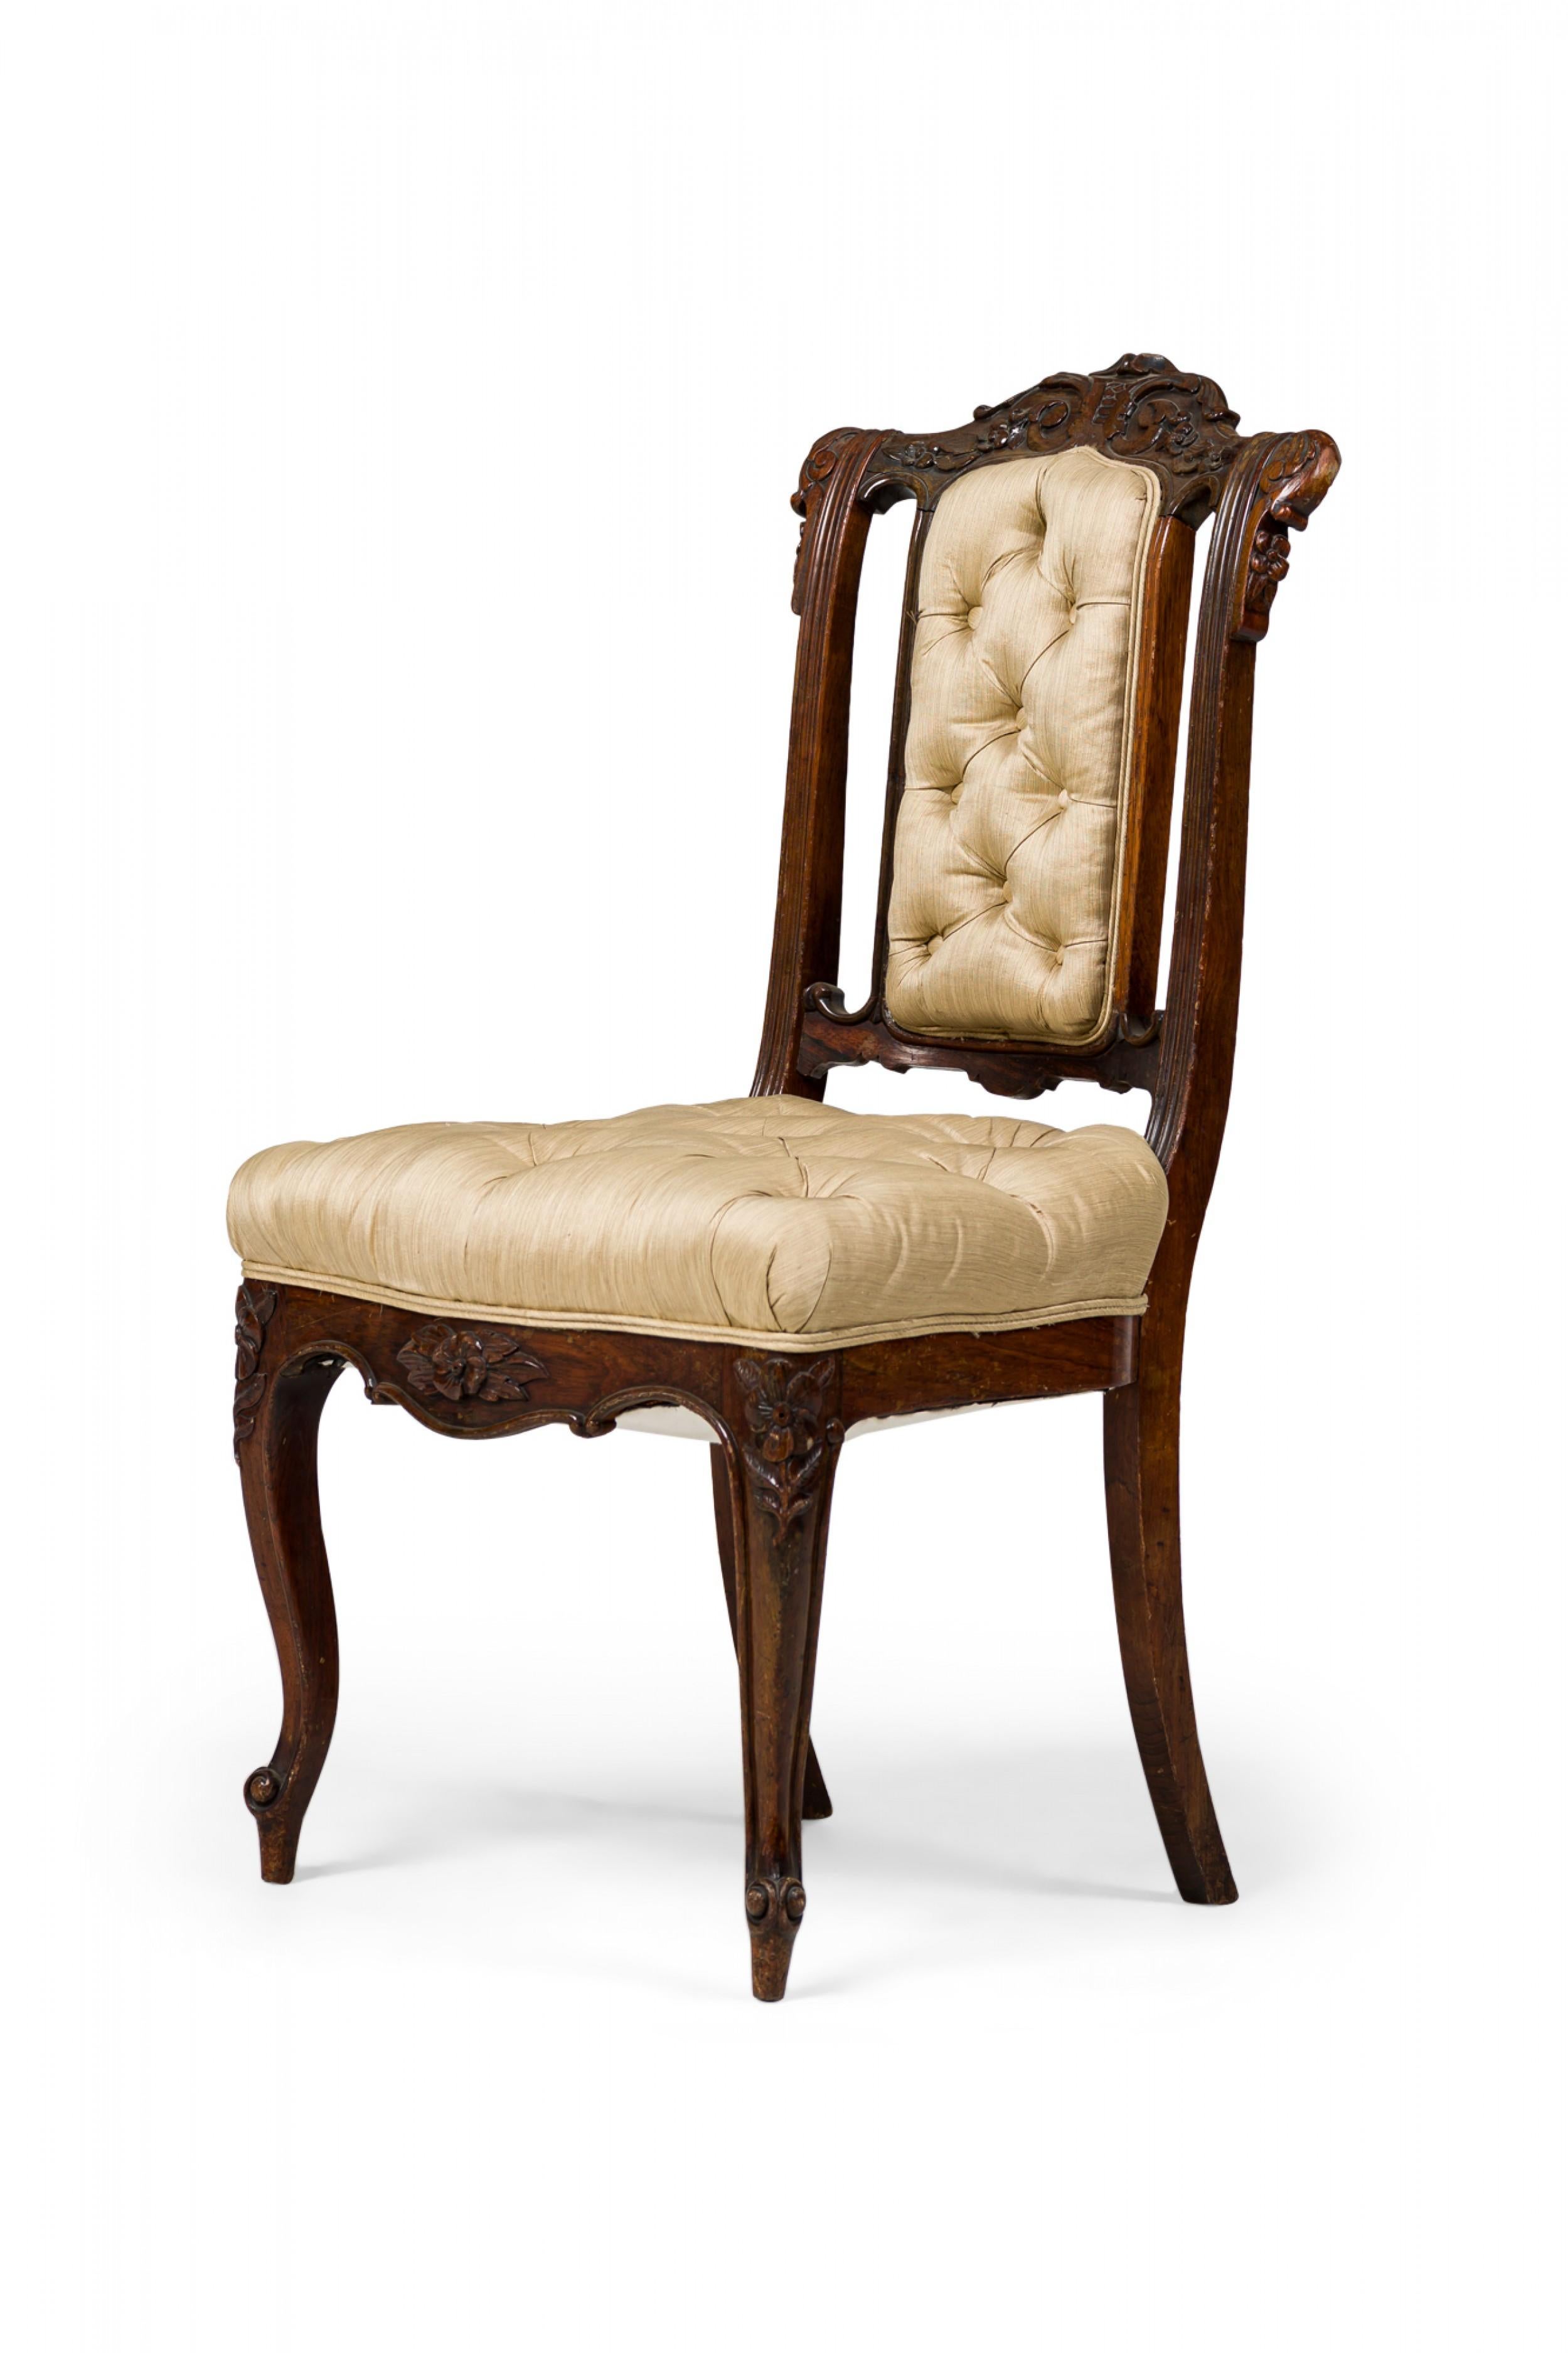 Set of 4 French Louis XV-Style Mahogany & Beige Tufted Upholstered Side Chairs For Sale 5